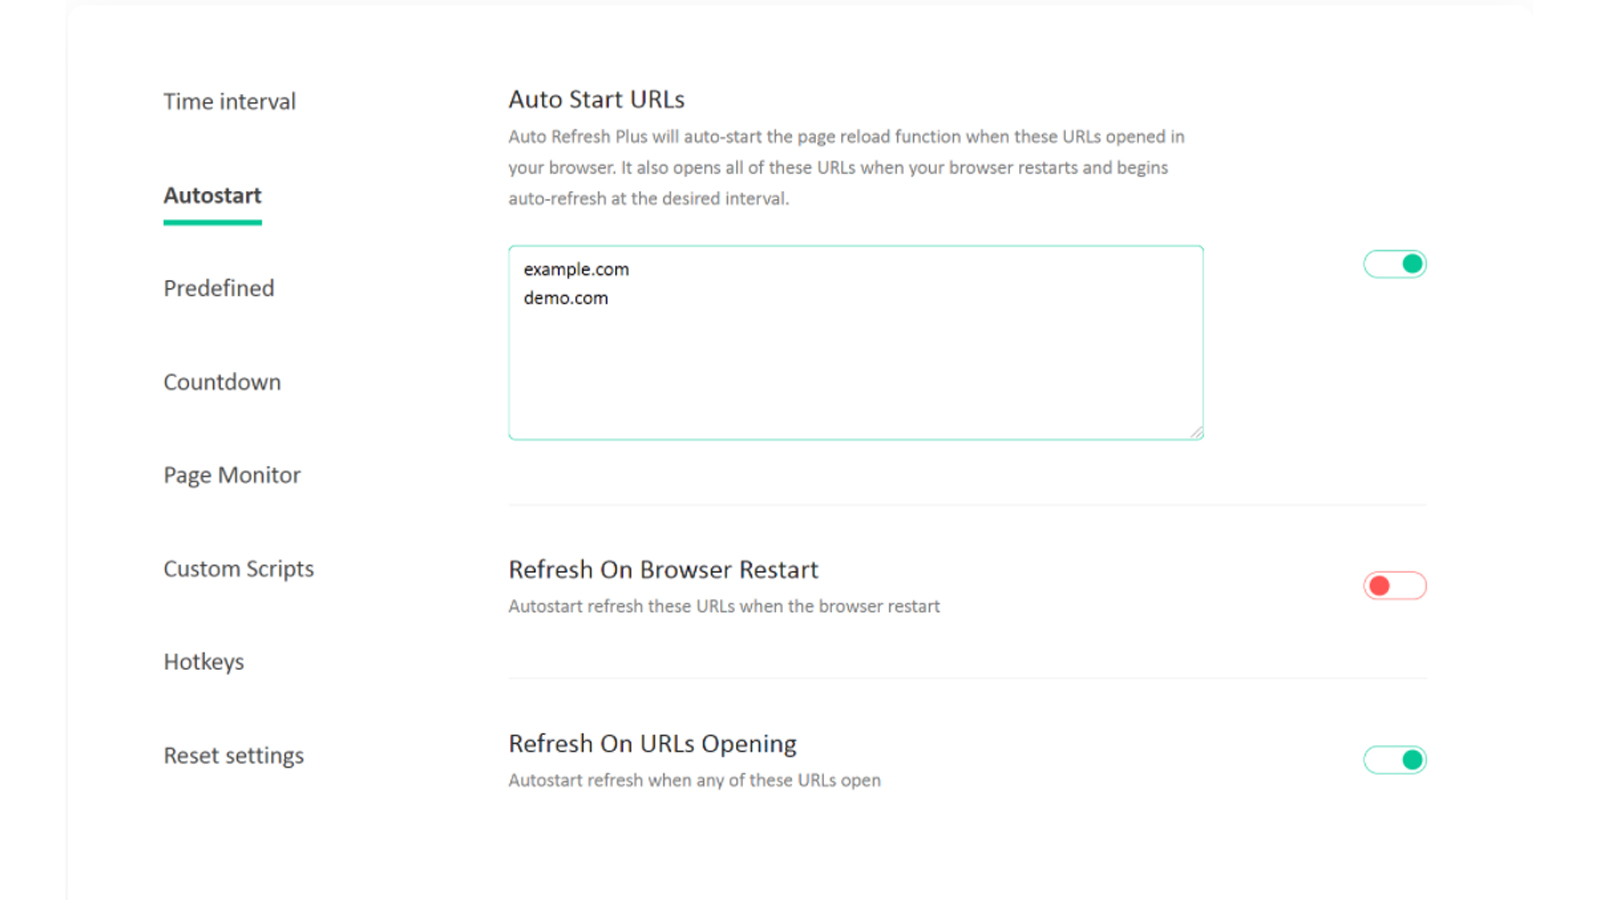 Get feedback from a vast remote working audience about Auto Refresh Plus